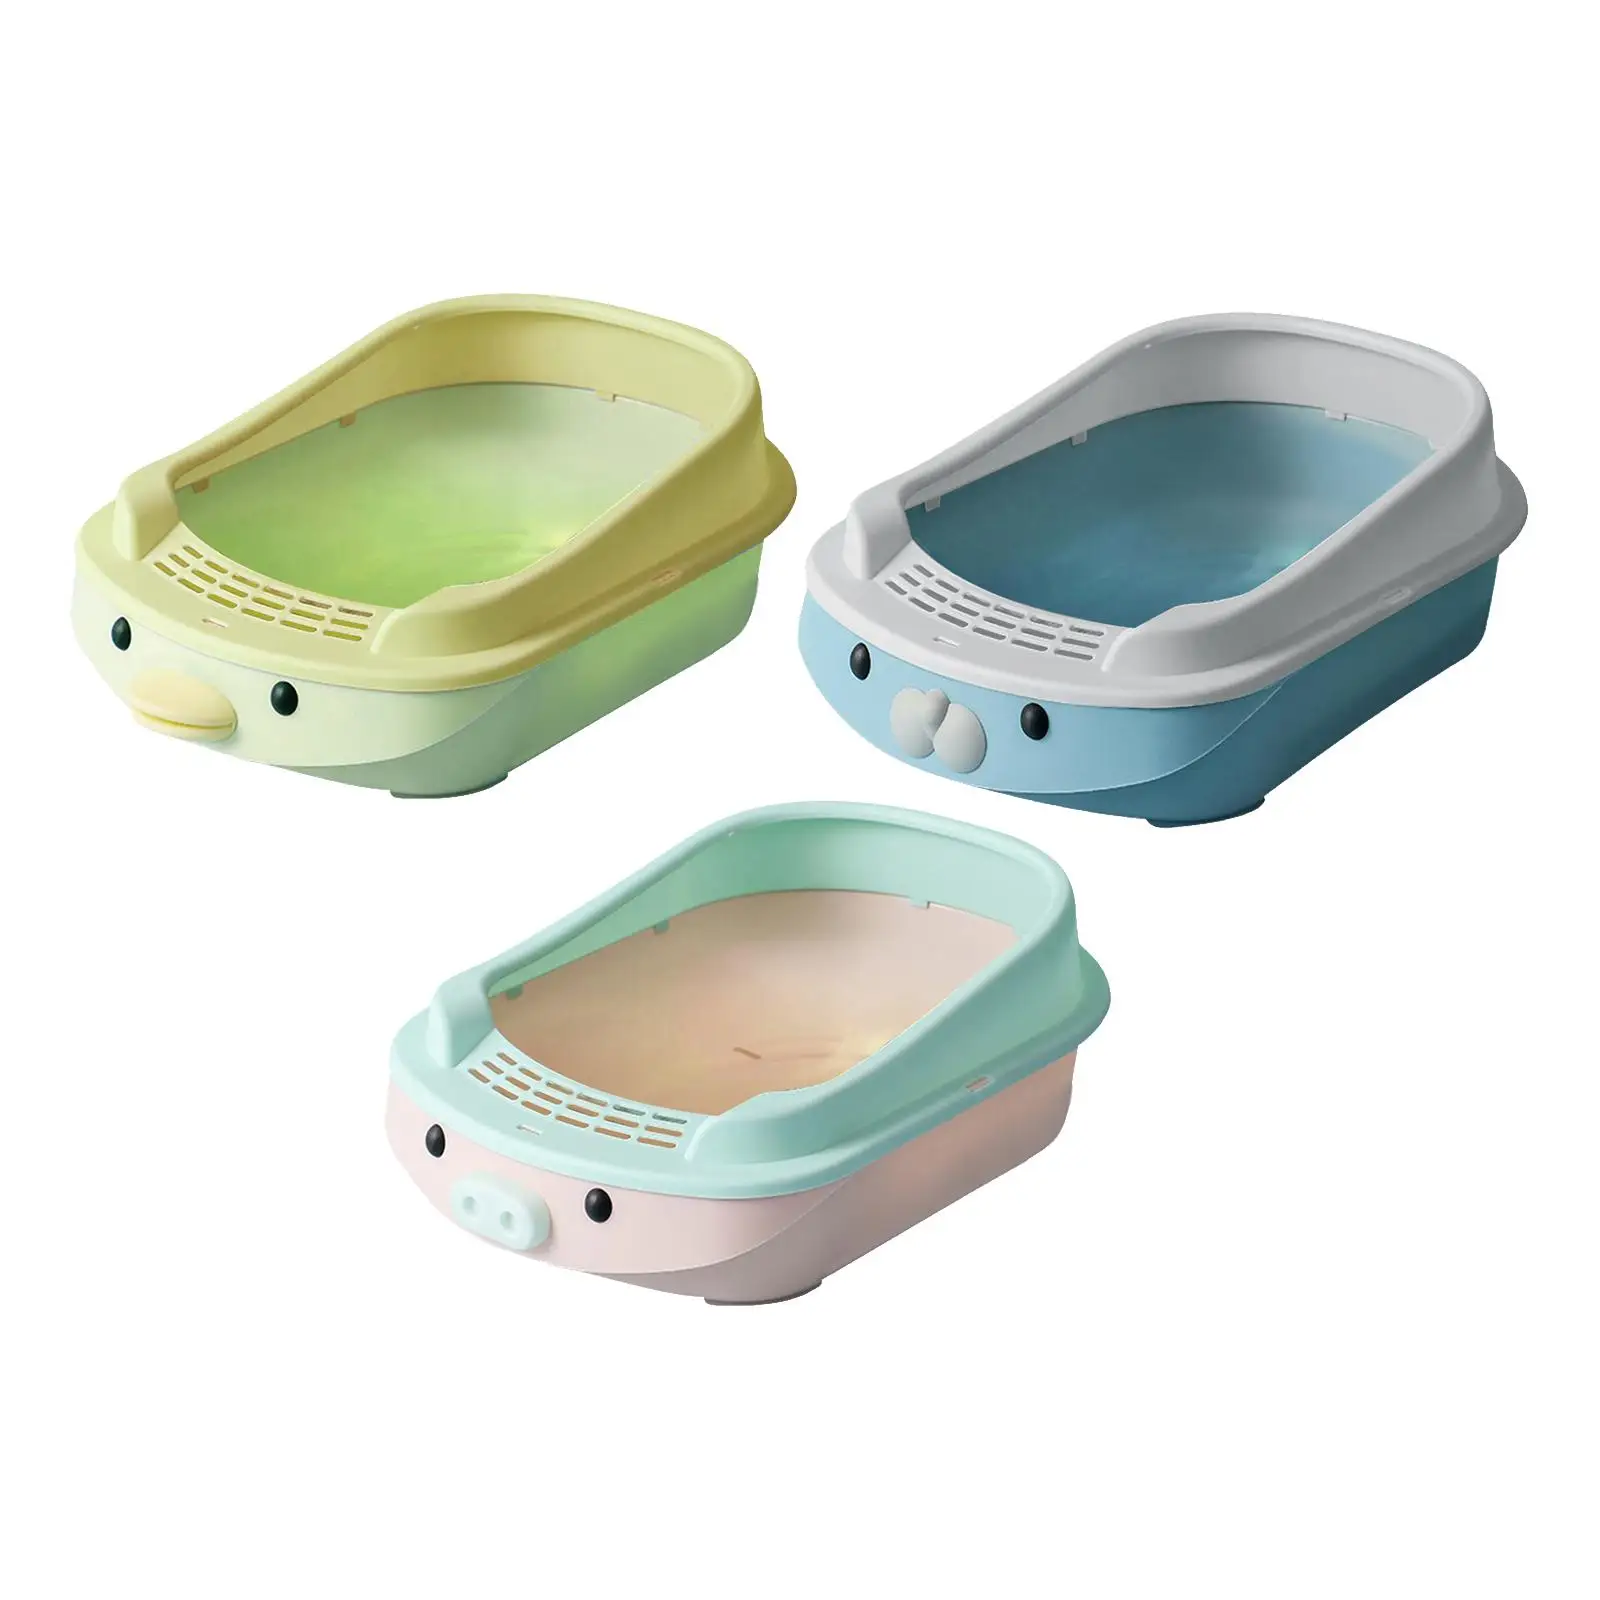 Portable Open Cats Litter Pan with Cat Scoop Open Top Kittens Litter Pan for Small Pets Dogs Cats Kittens to Senior Cats